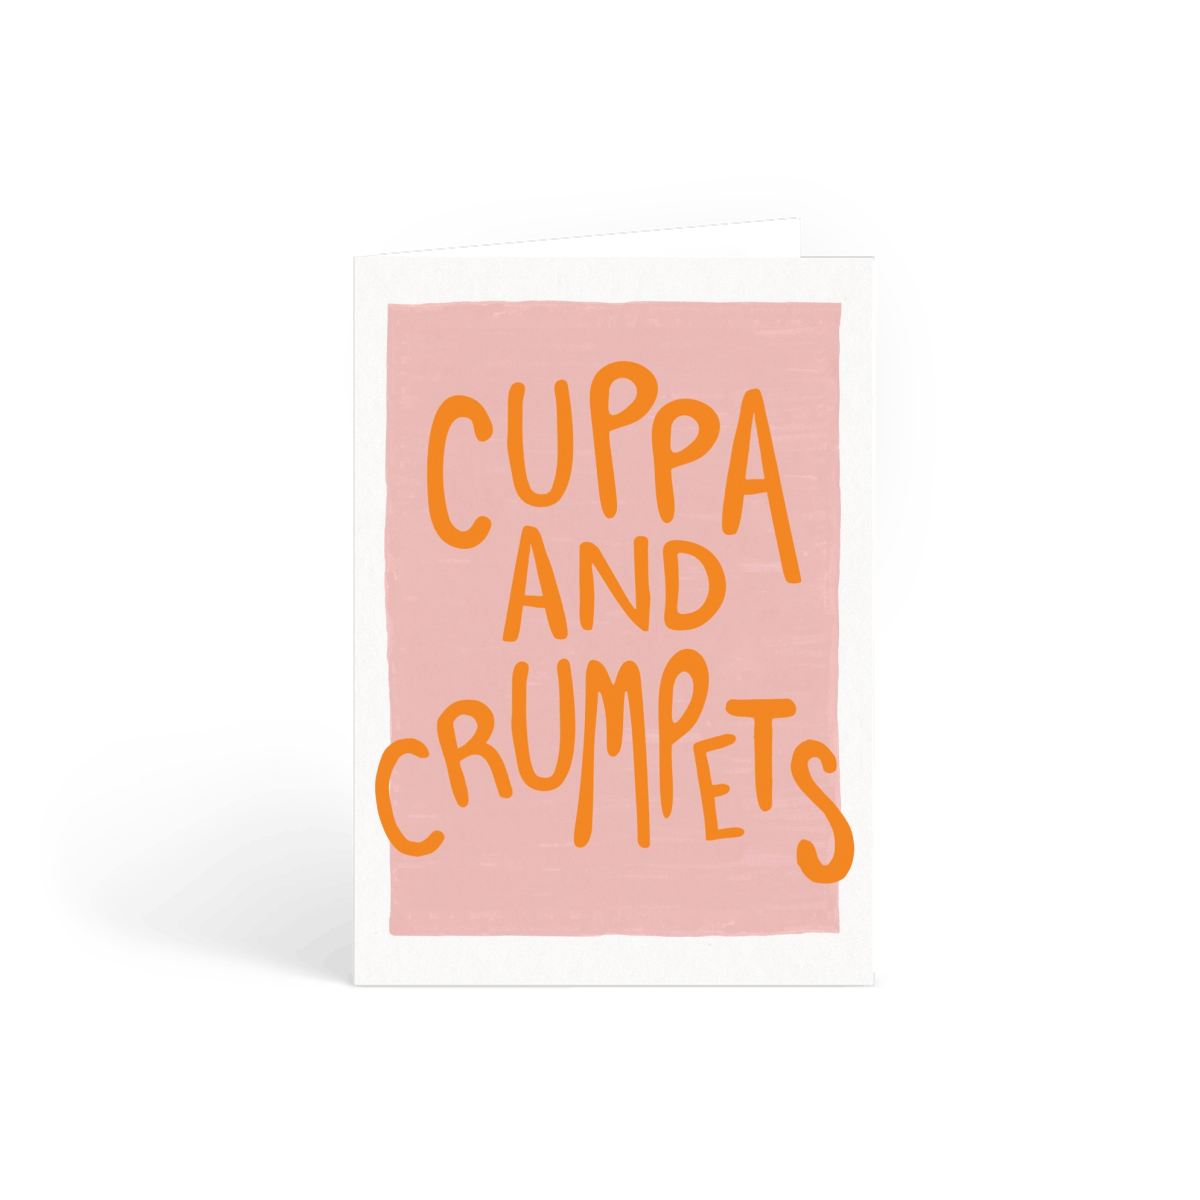 Cuppa and Crumpets